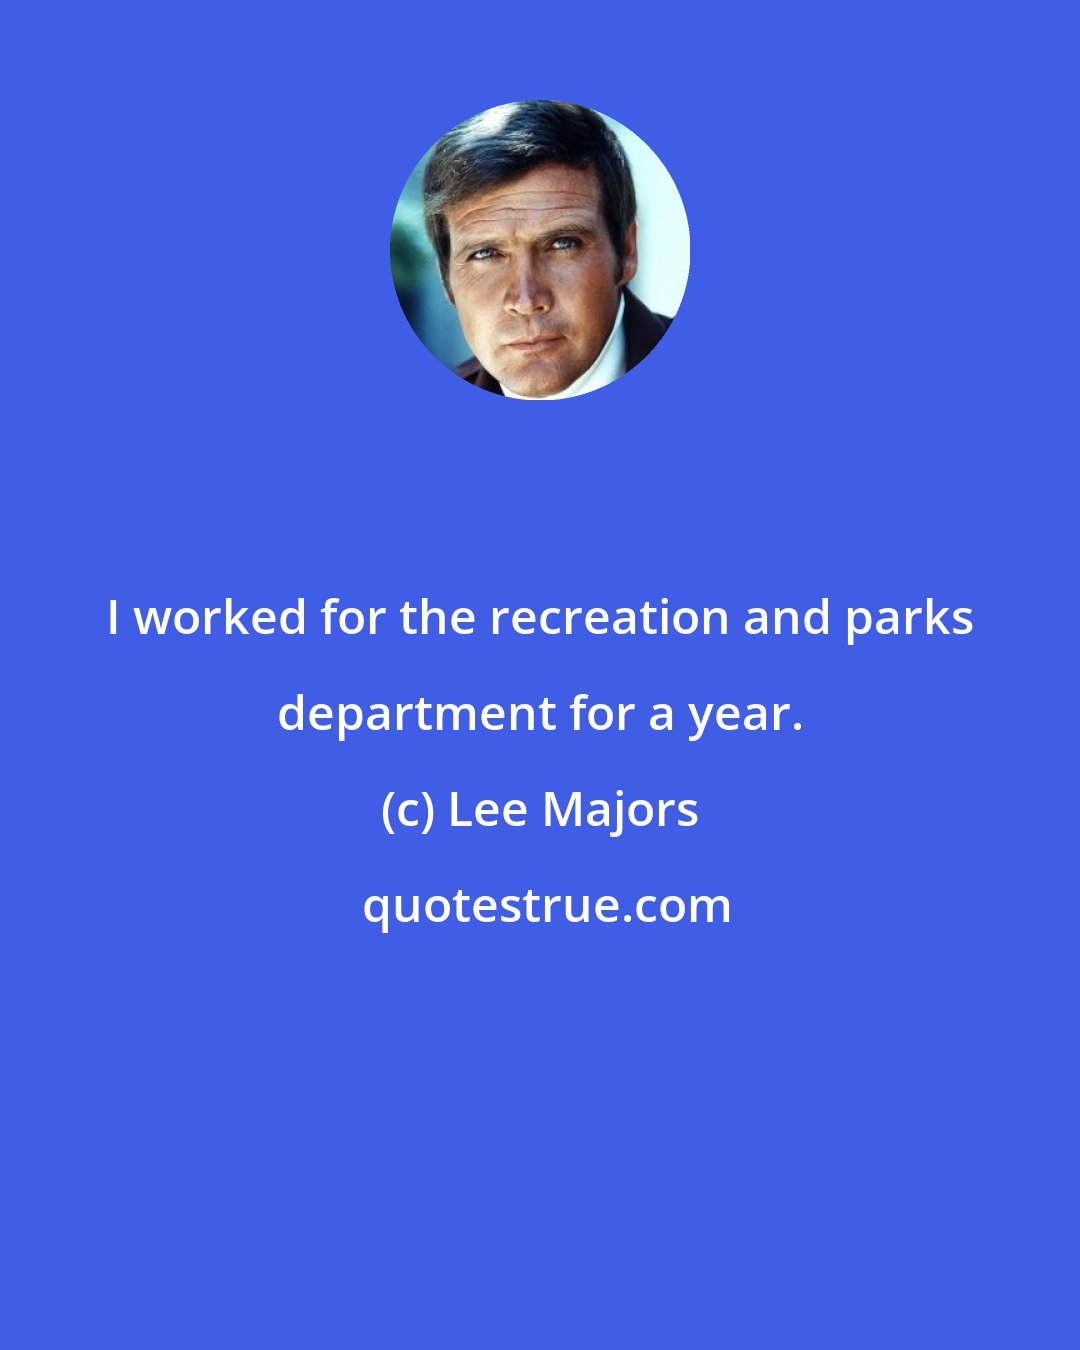 Lee Majors: I worked for the recreation and parks department for a year.